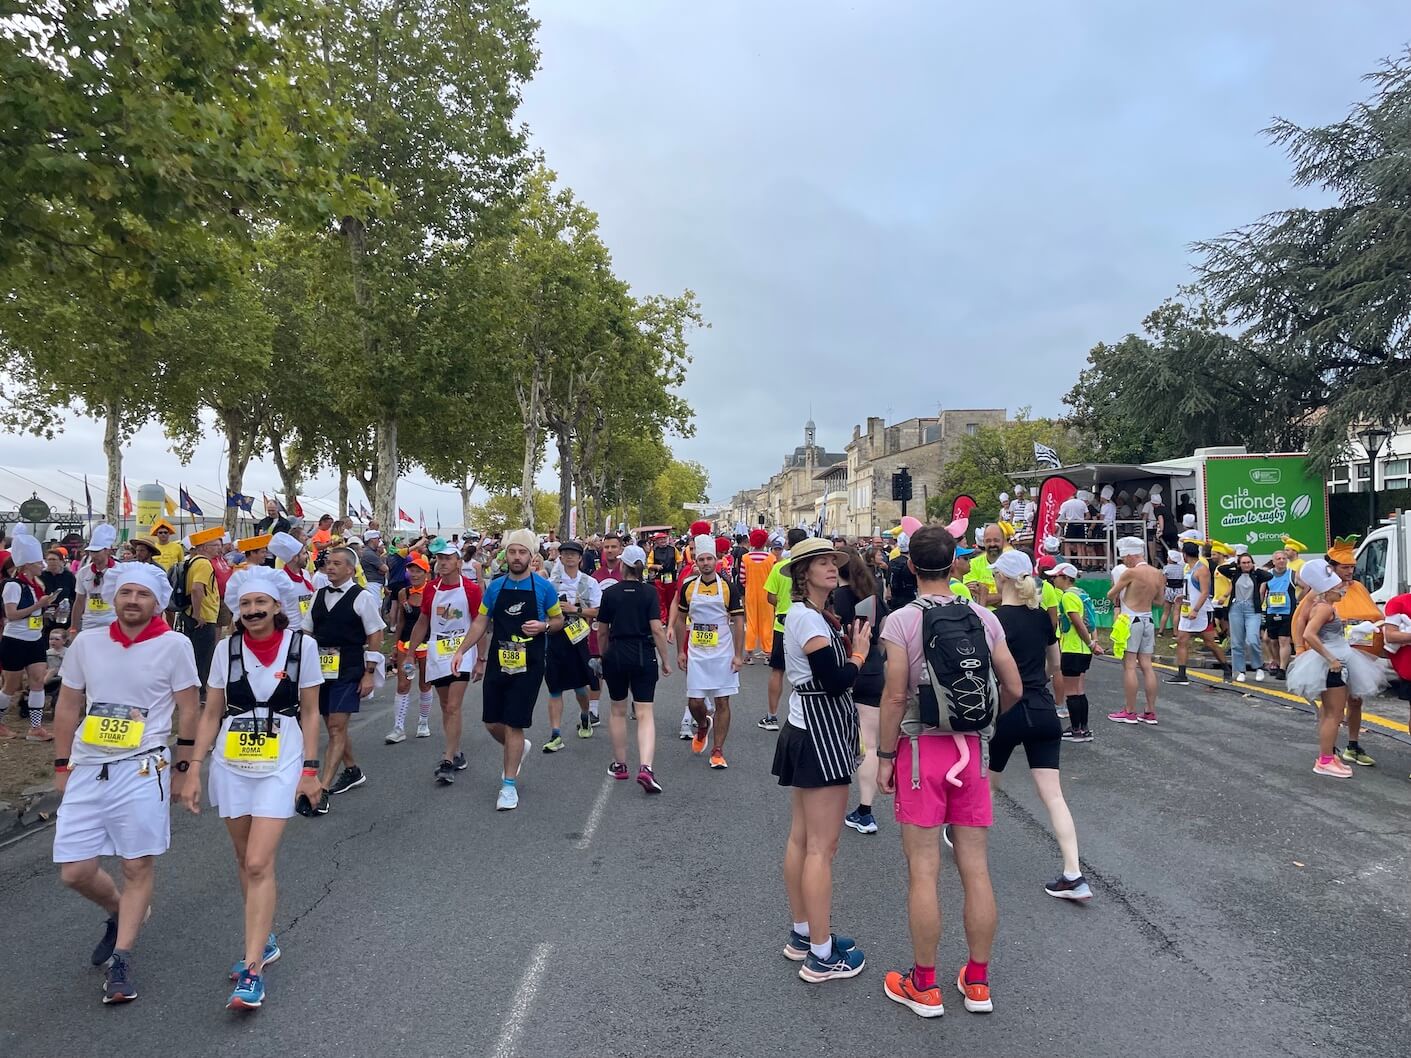 Runners milling about in Pauillac just before the start of the Marathon du Medoc 